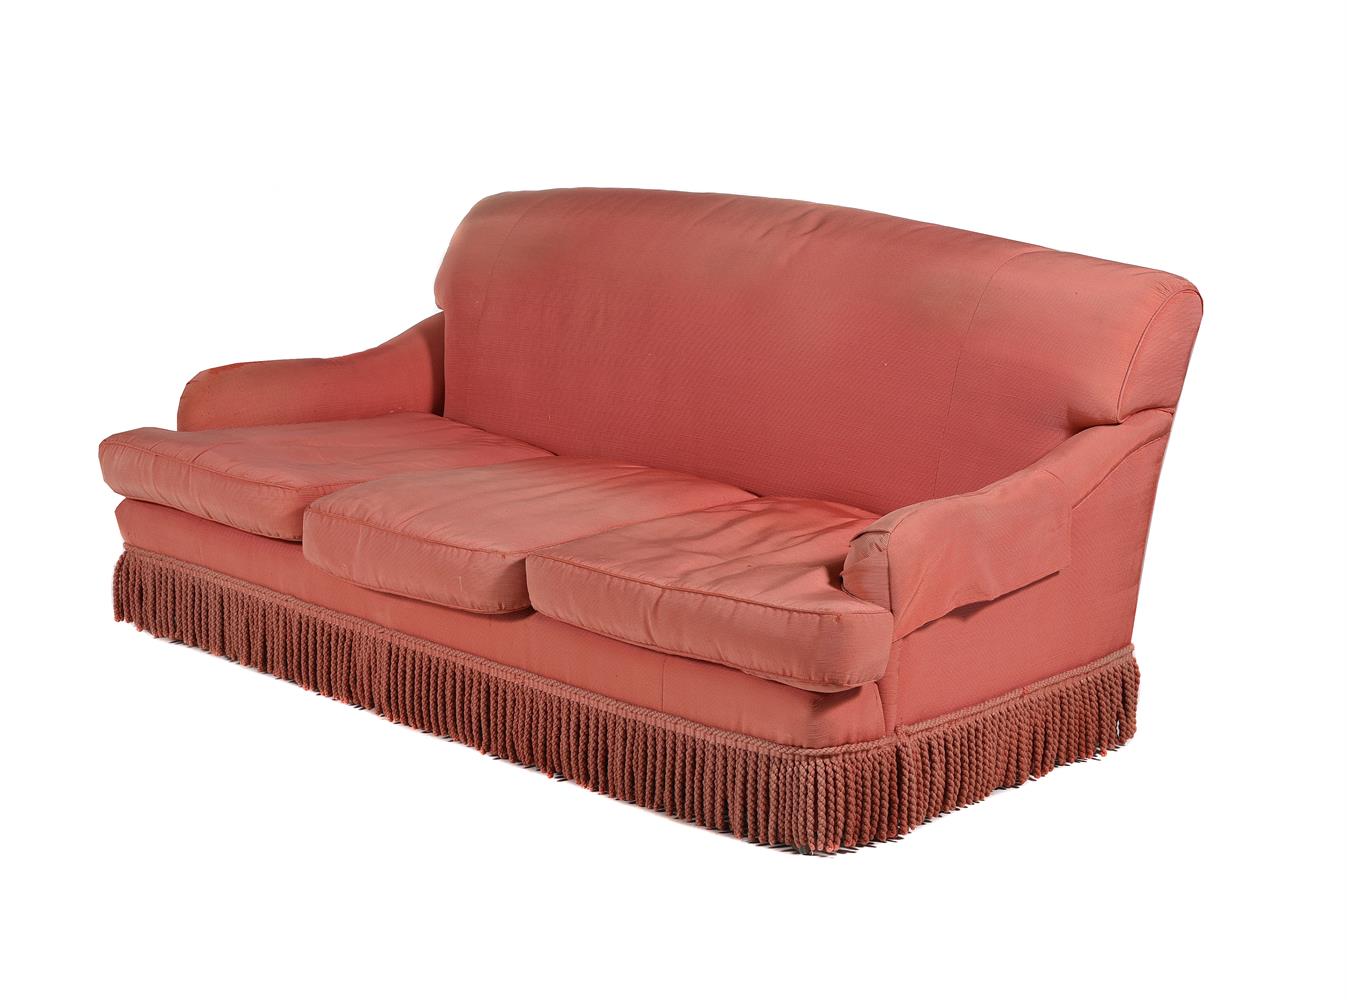 A PAIR OF CORAL PINK UPHOLSTERED THREE SEAT SOFAS - Image 2 of 2